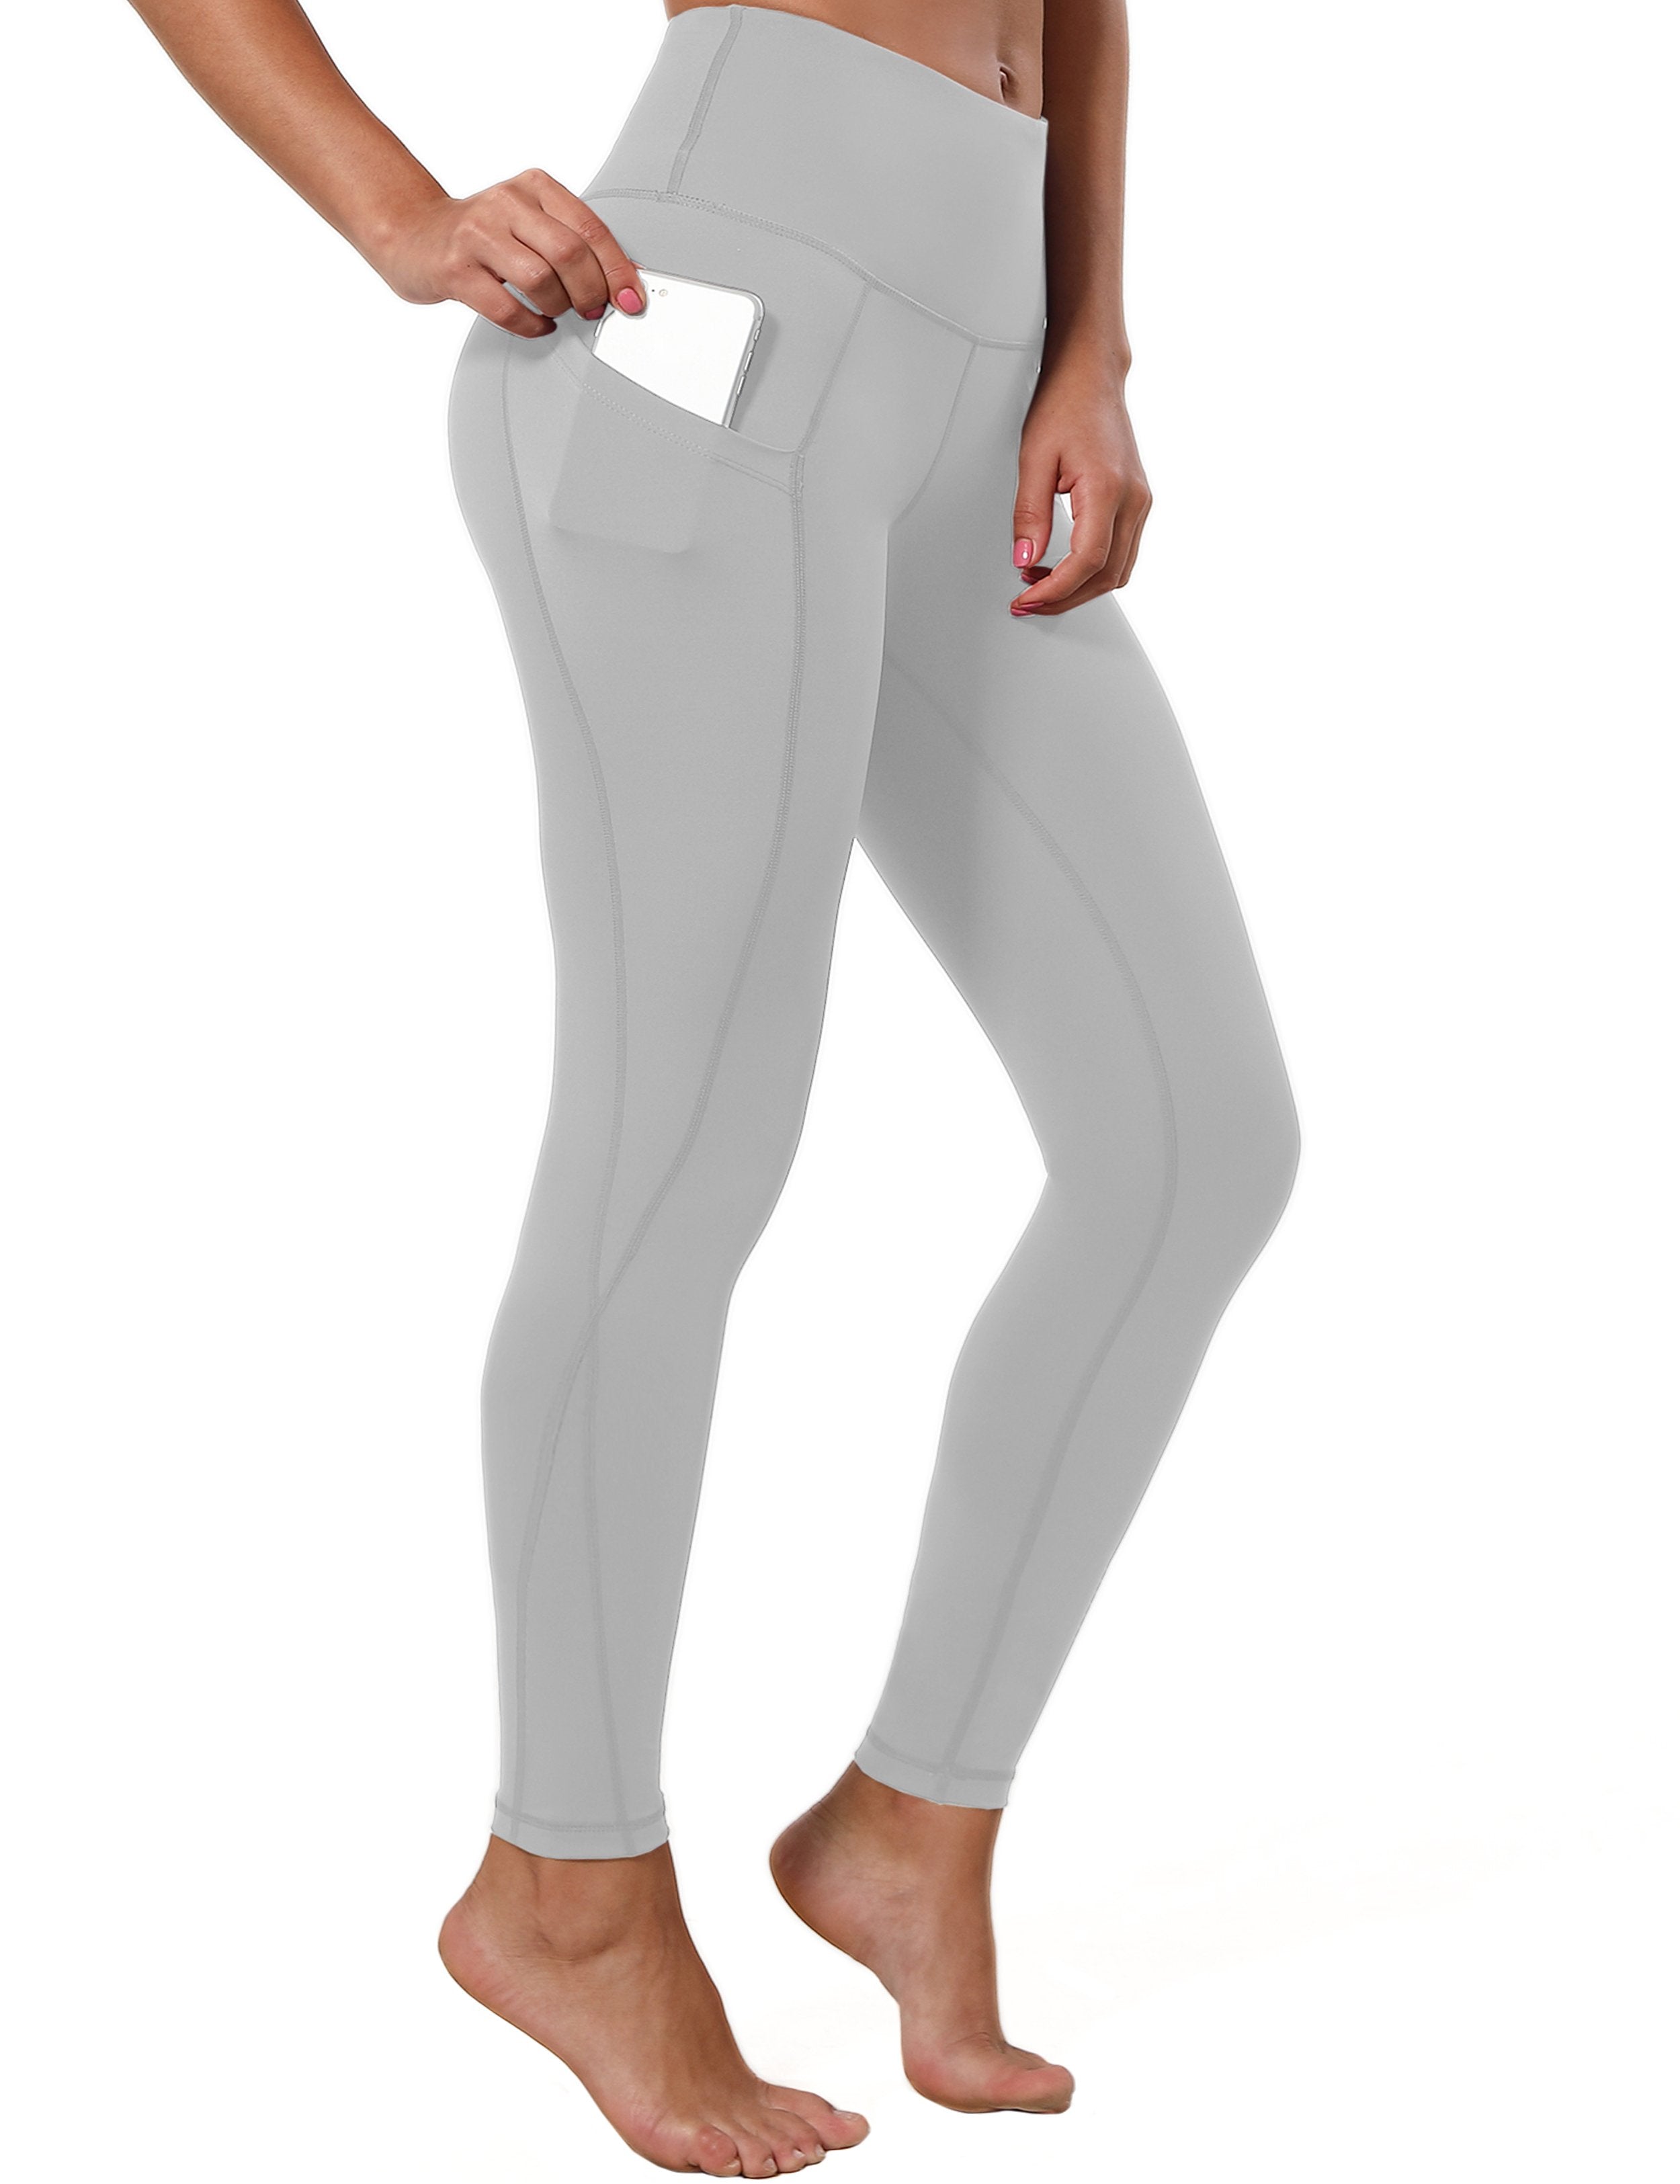 High Waist Side Pockets Yoga Pants lightgray 75% Nylon, 25% Spandex Fabric doesn't attract lint easily 4-way stretch No see-through Moisture-wicking Tummy control Inner pocket